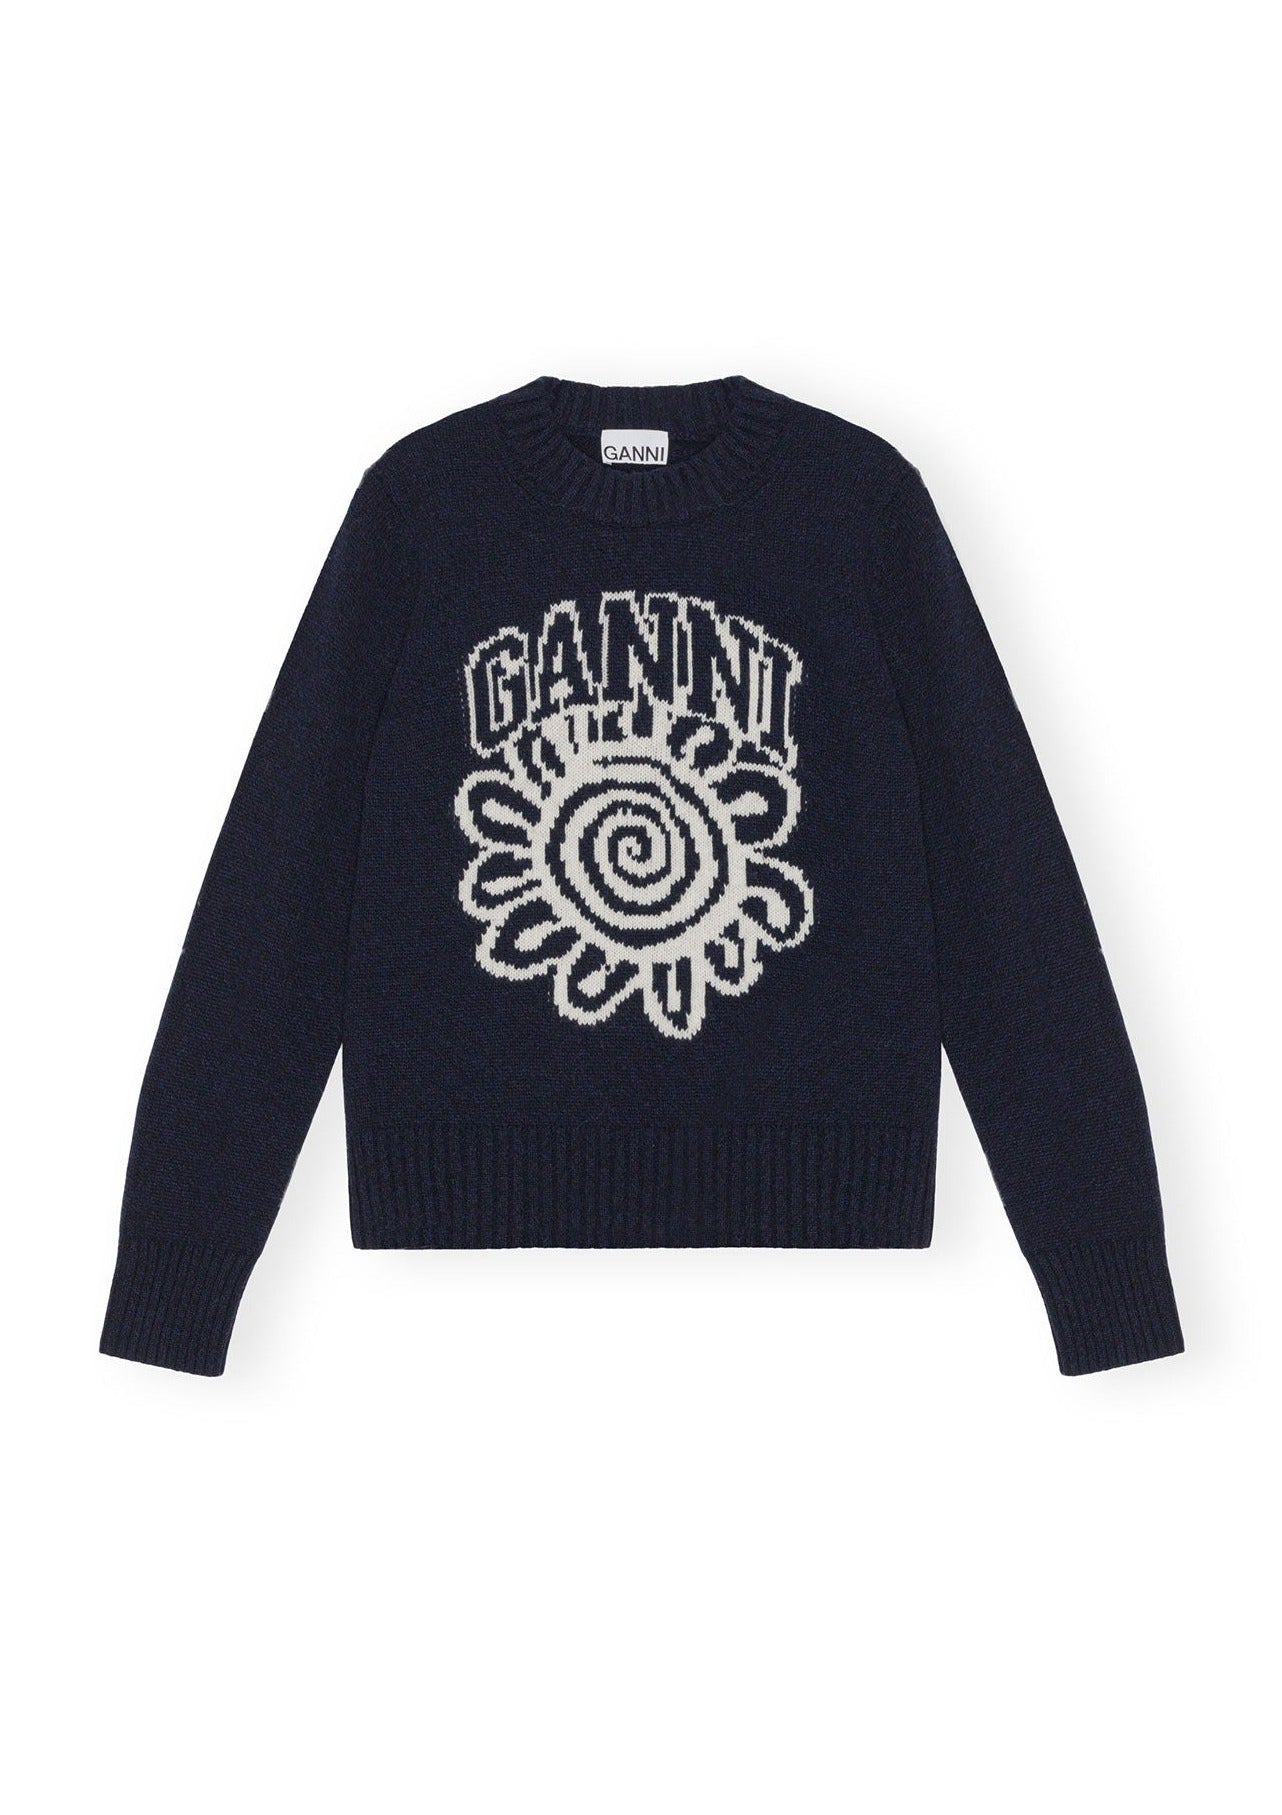 Ganni | Graphic O-Neck Flower Pullover | Sky Captain – One of a few